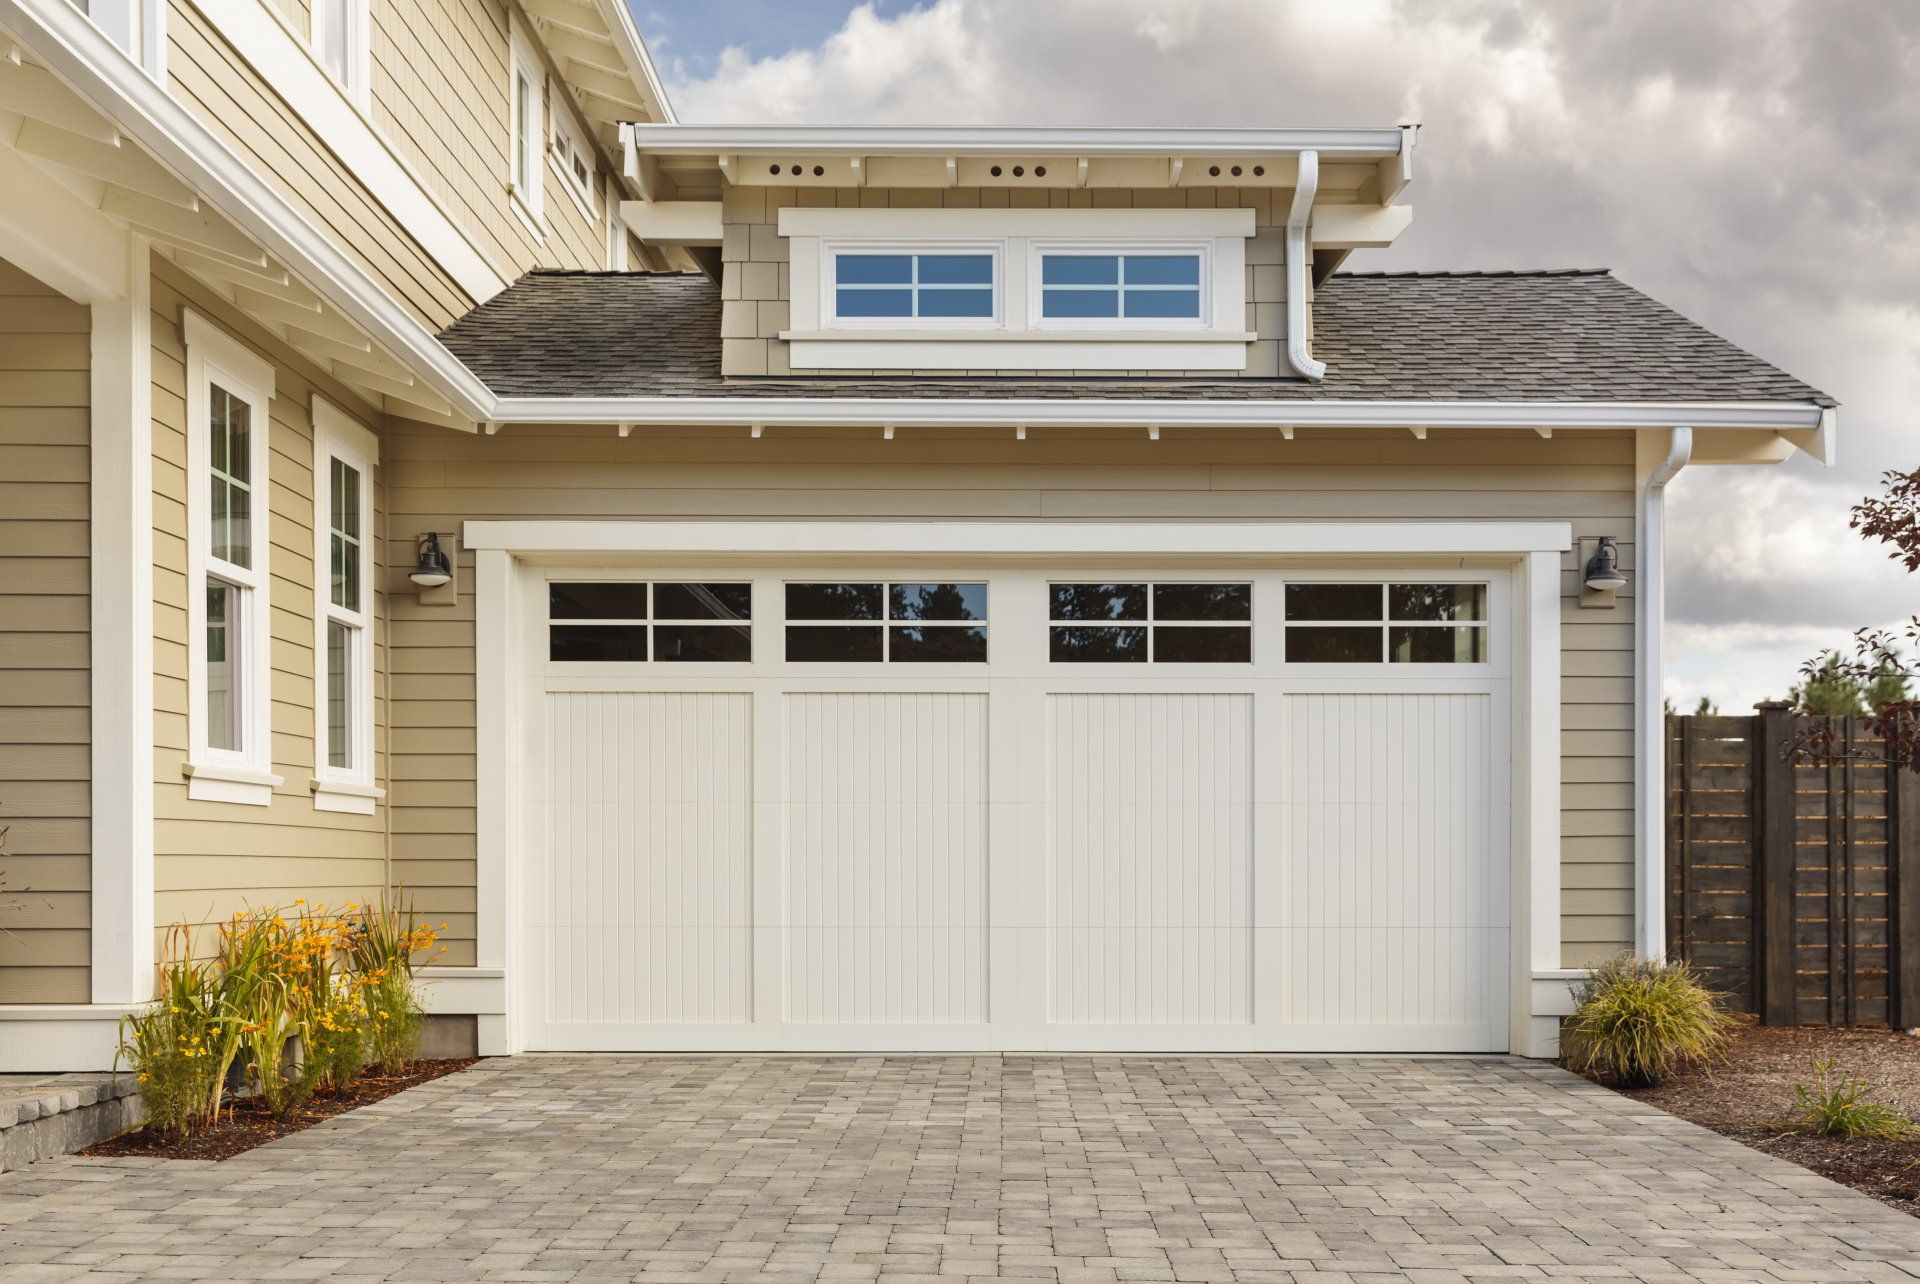 Double garage with short driveway in day